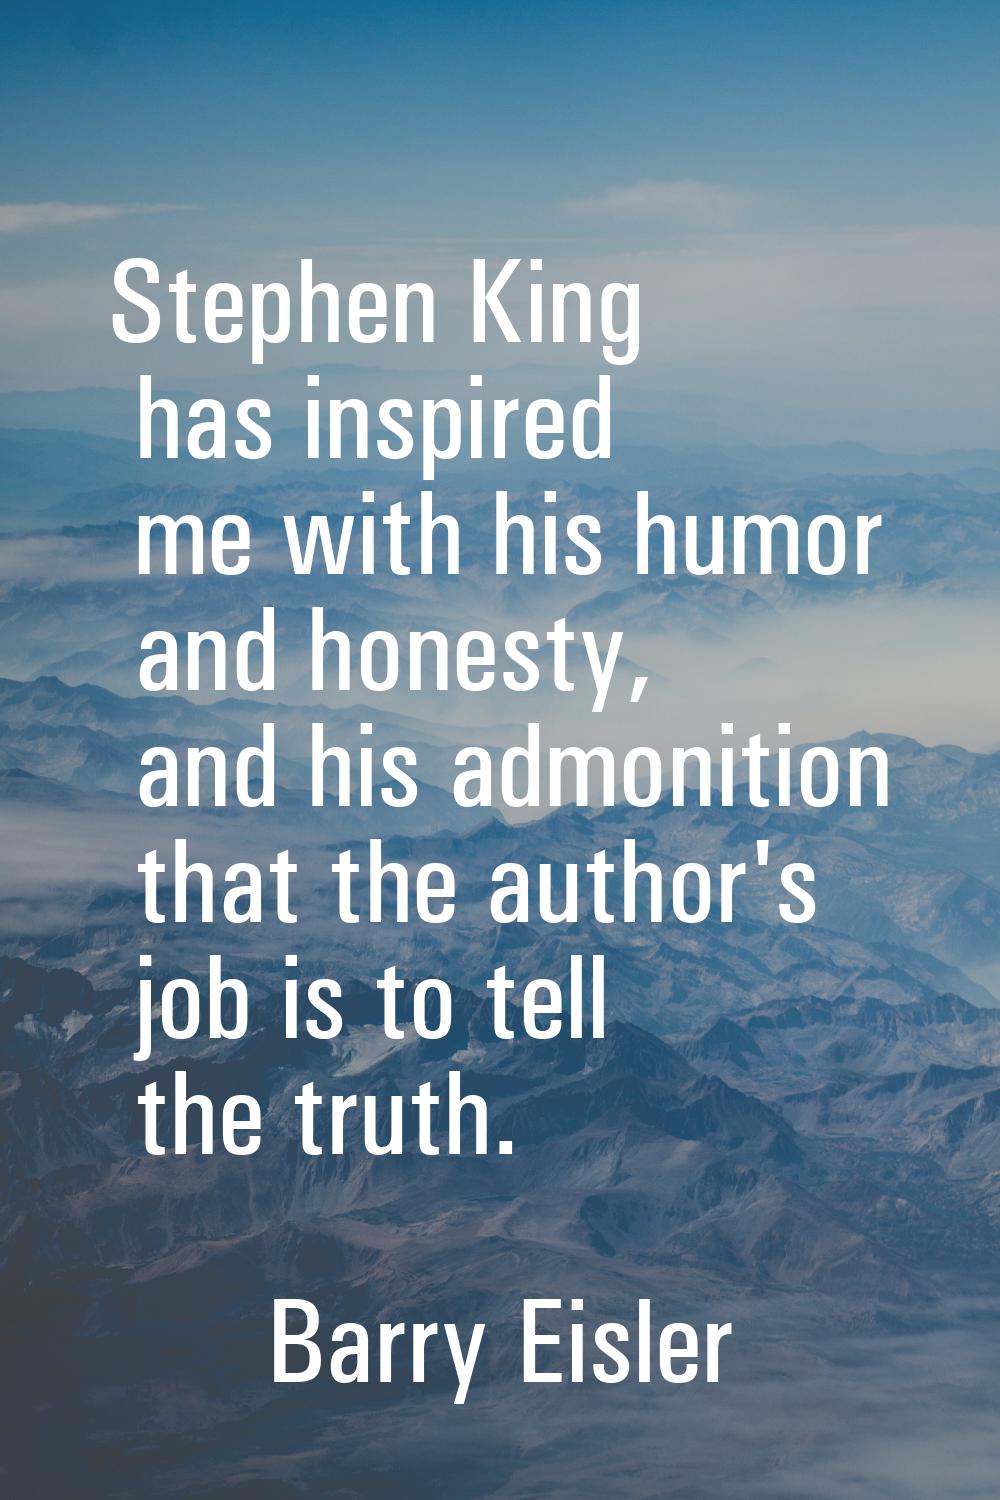 Stephen King has inspired me with his humor and honesty, and his admonition that the author's job i